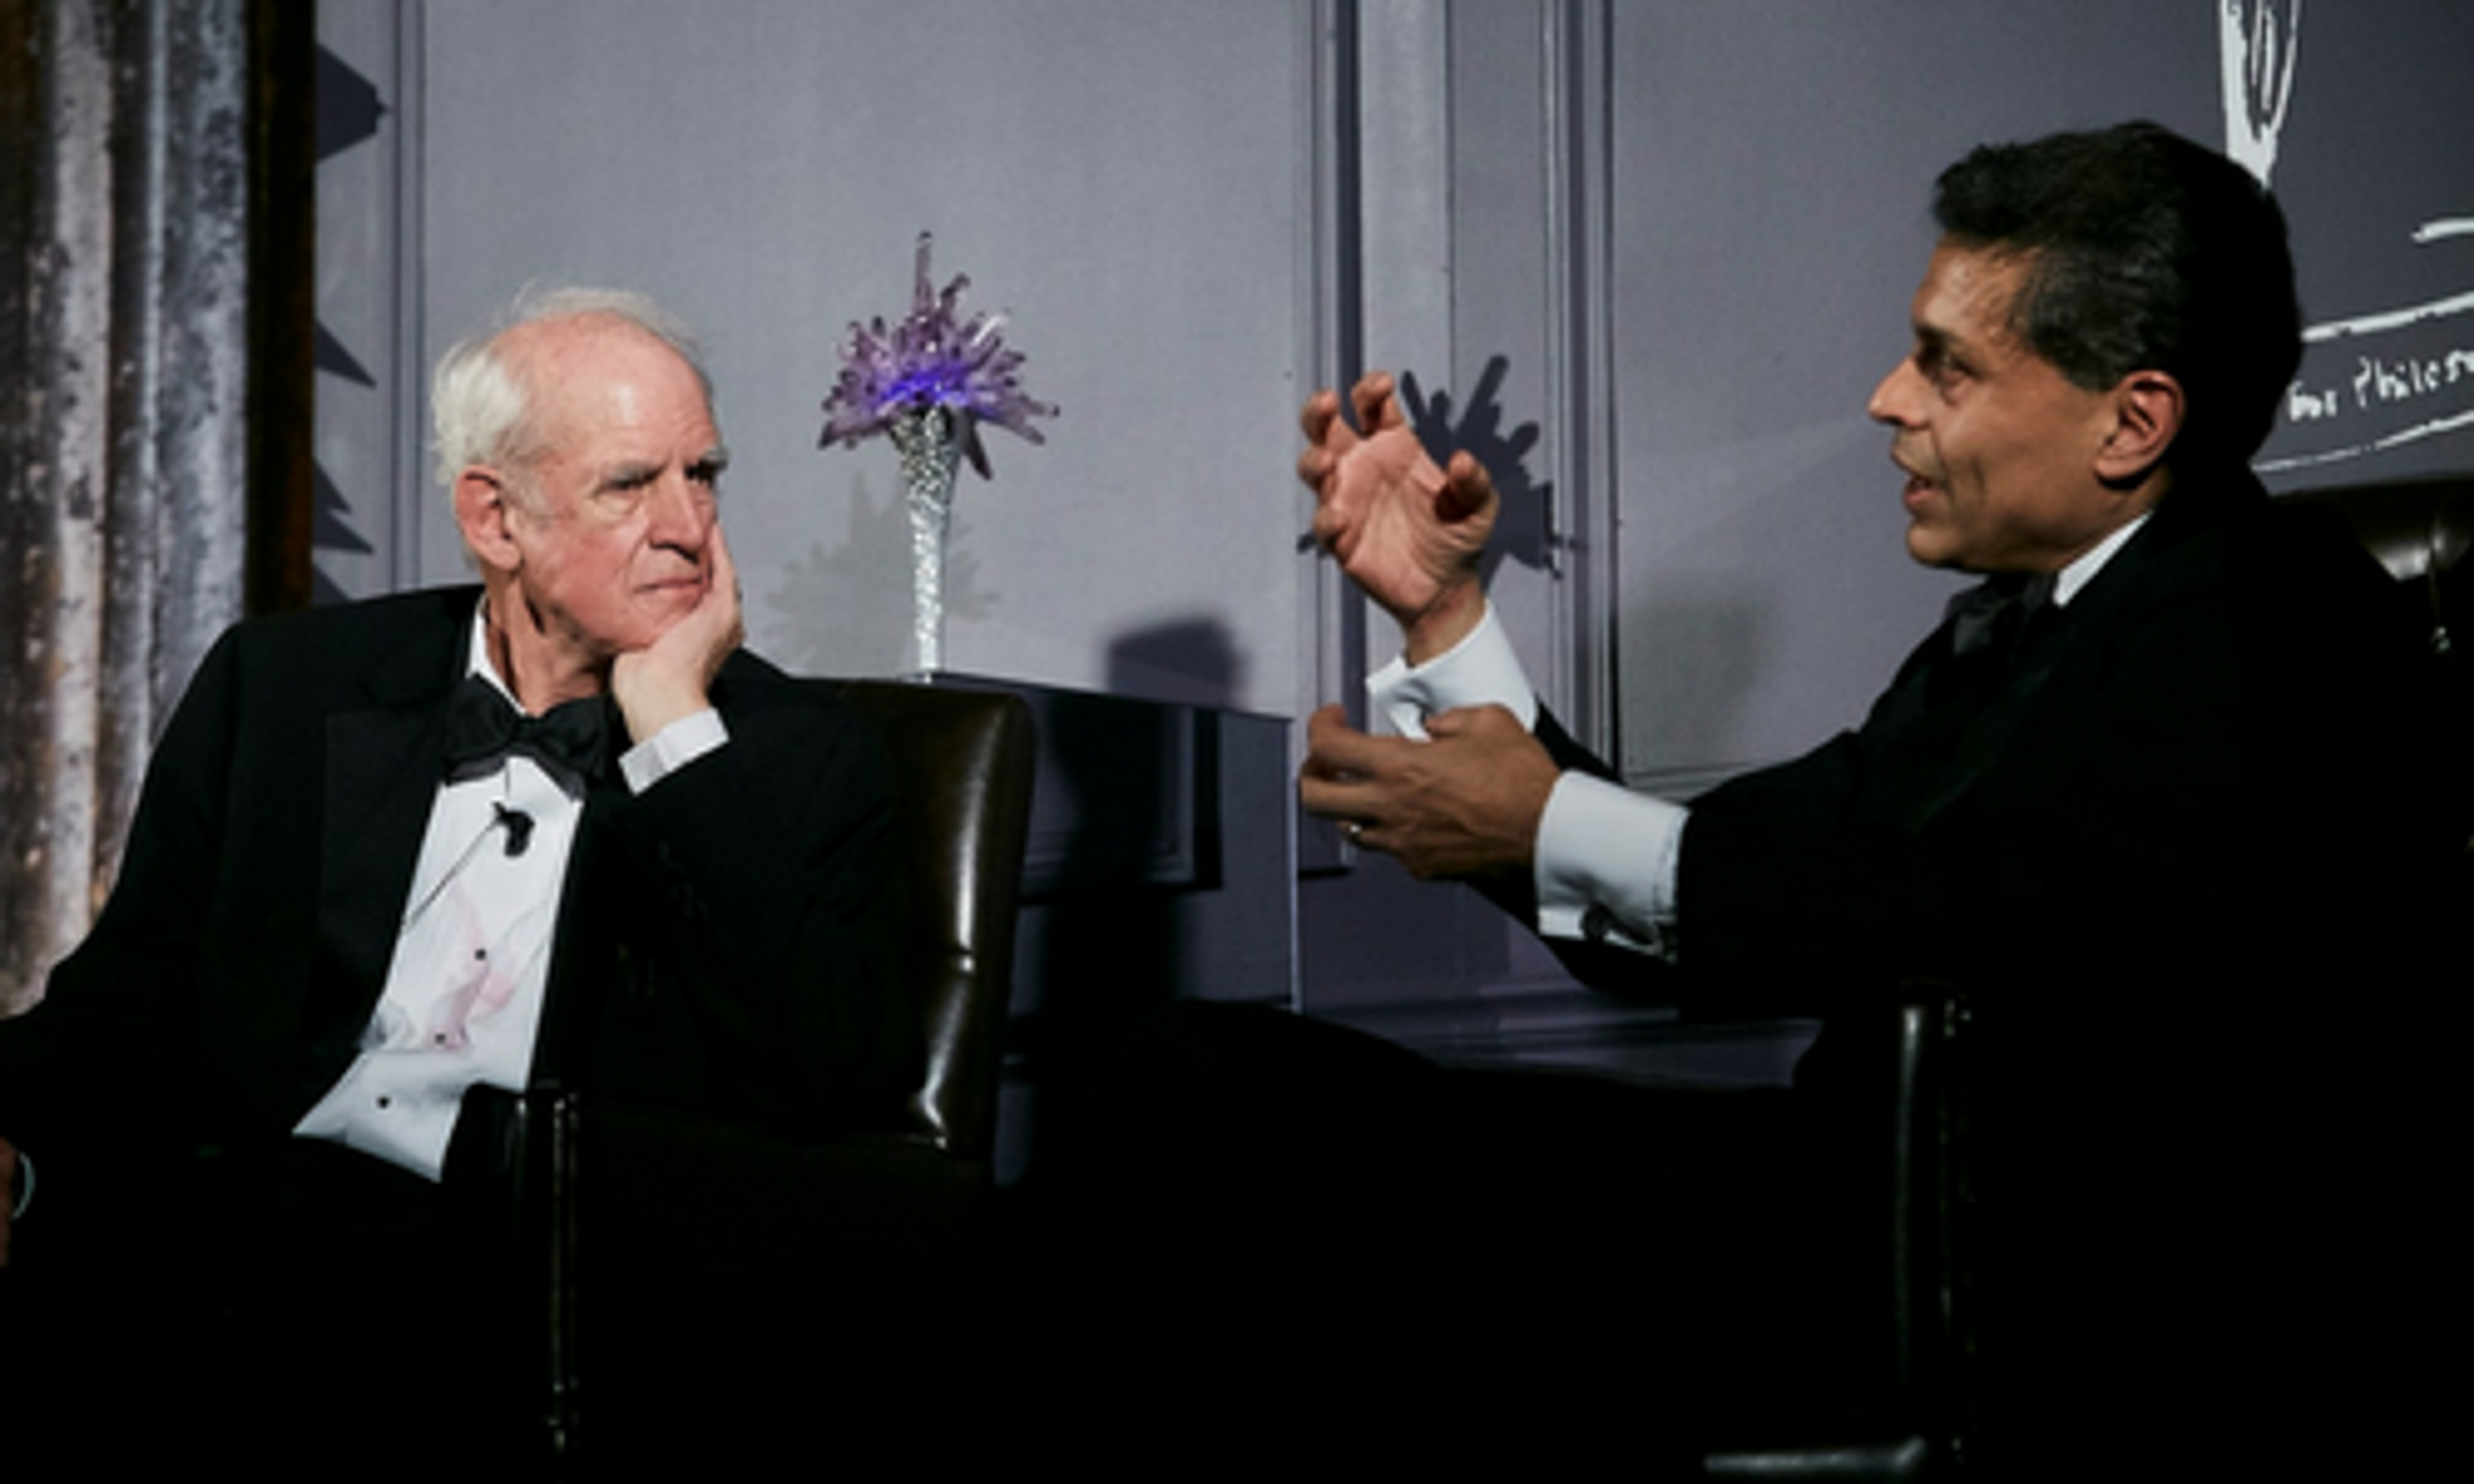 Berggruen Prize Winner Charles Taylor and Fareed Zakaria Held a Wide Ranging Discussion about Taylor’s Work and Influence